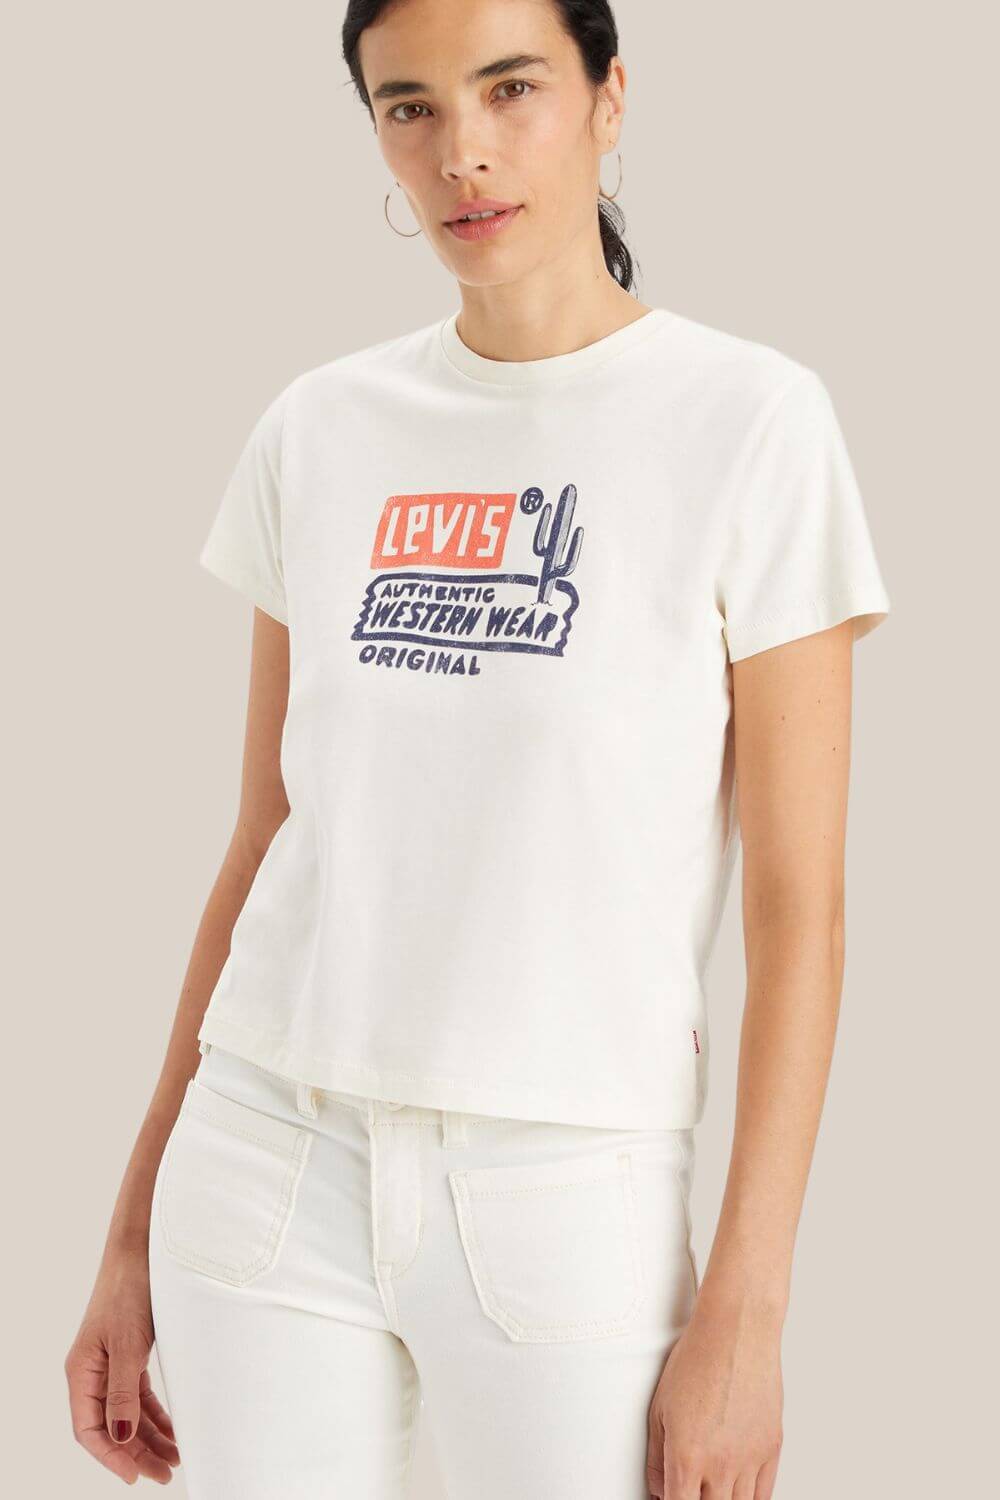 Levi Womens Classic Tee Authentic Western Wear